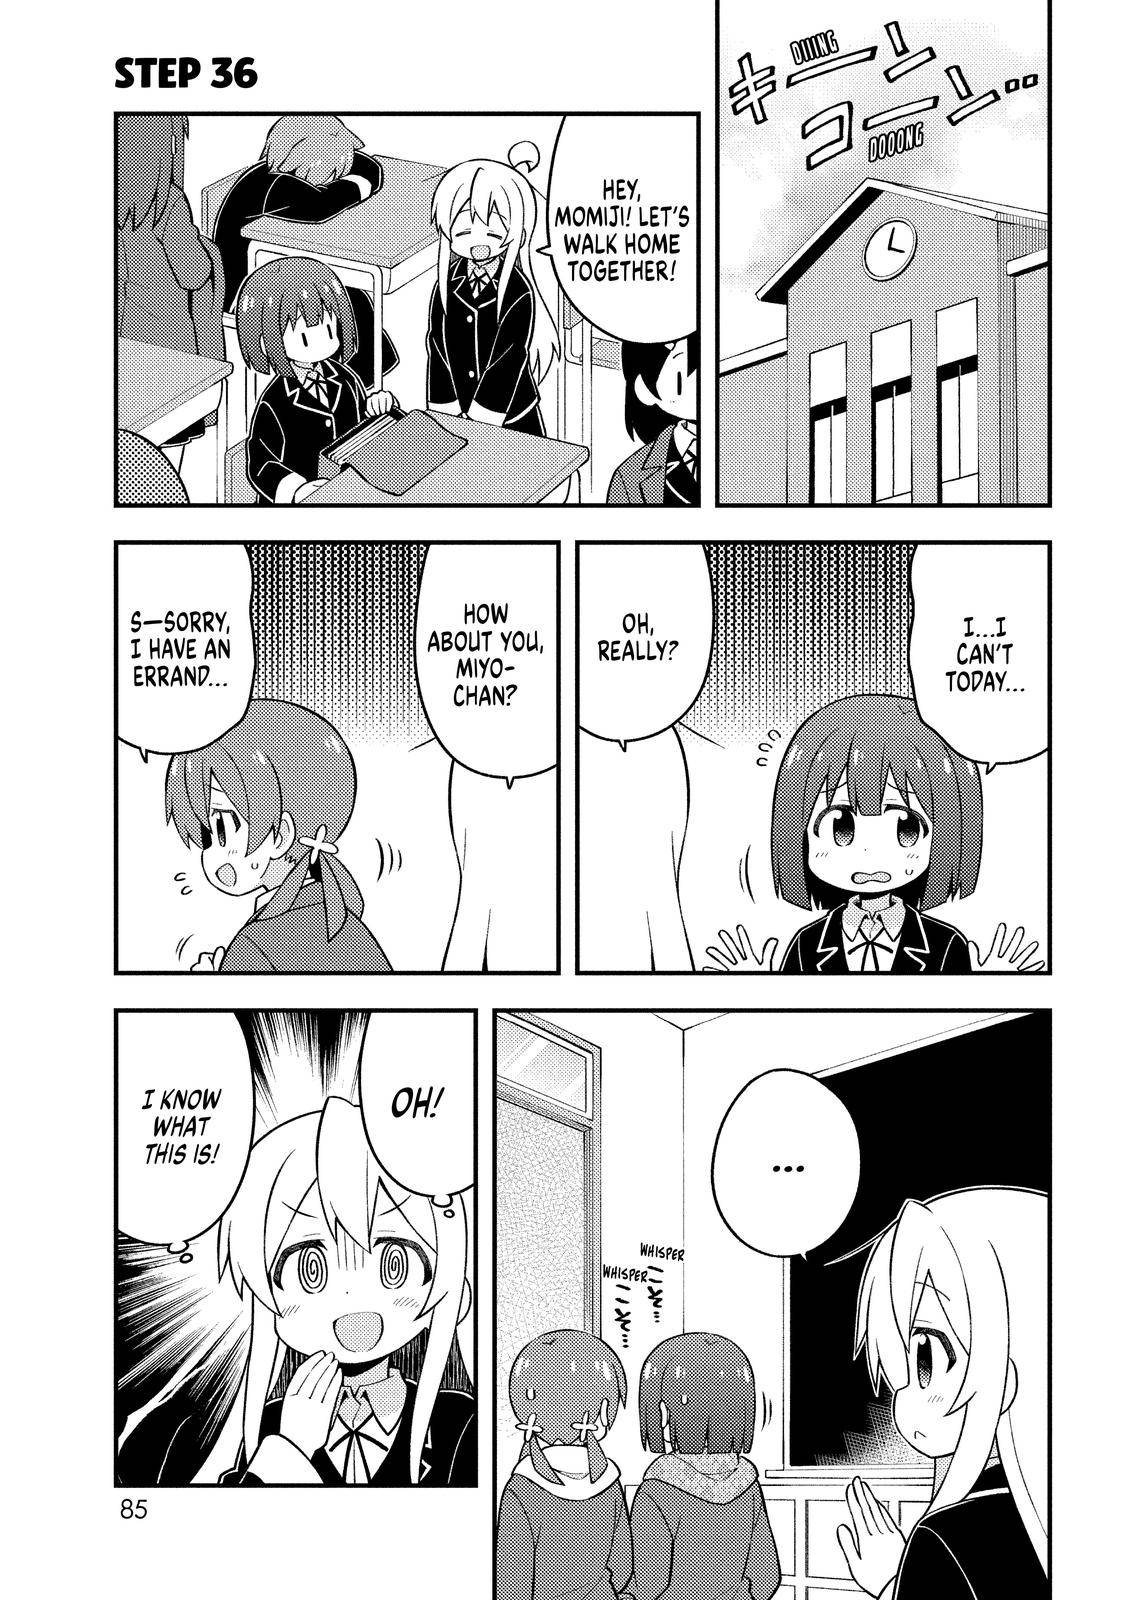 ONIMAI - I'm Now Your Sister! - chapter 36 - #1